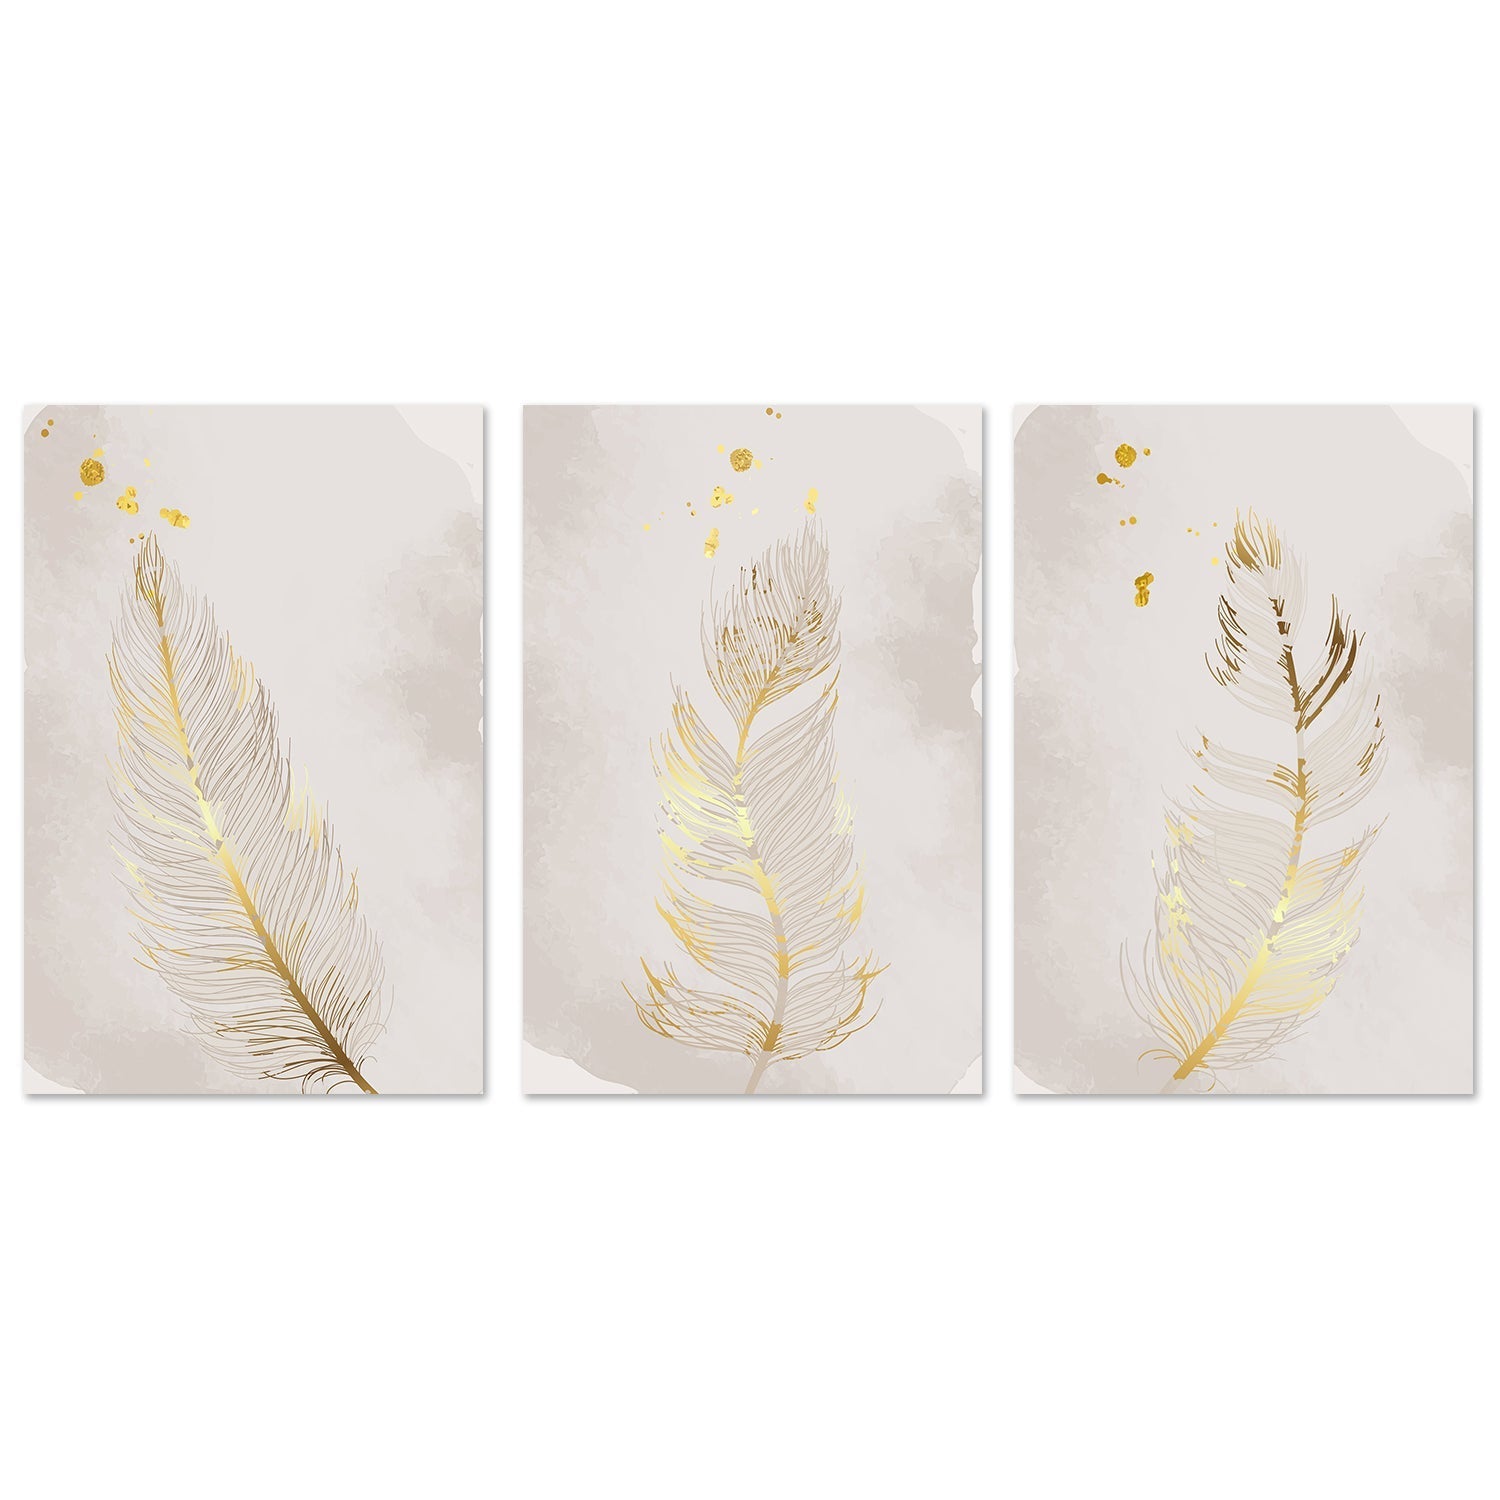 Gold Tipped Feathers Art: Canvas Prints, Frames & Posters